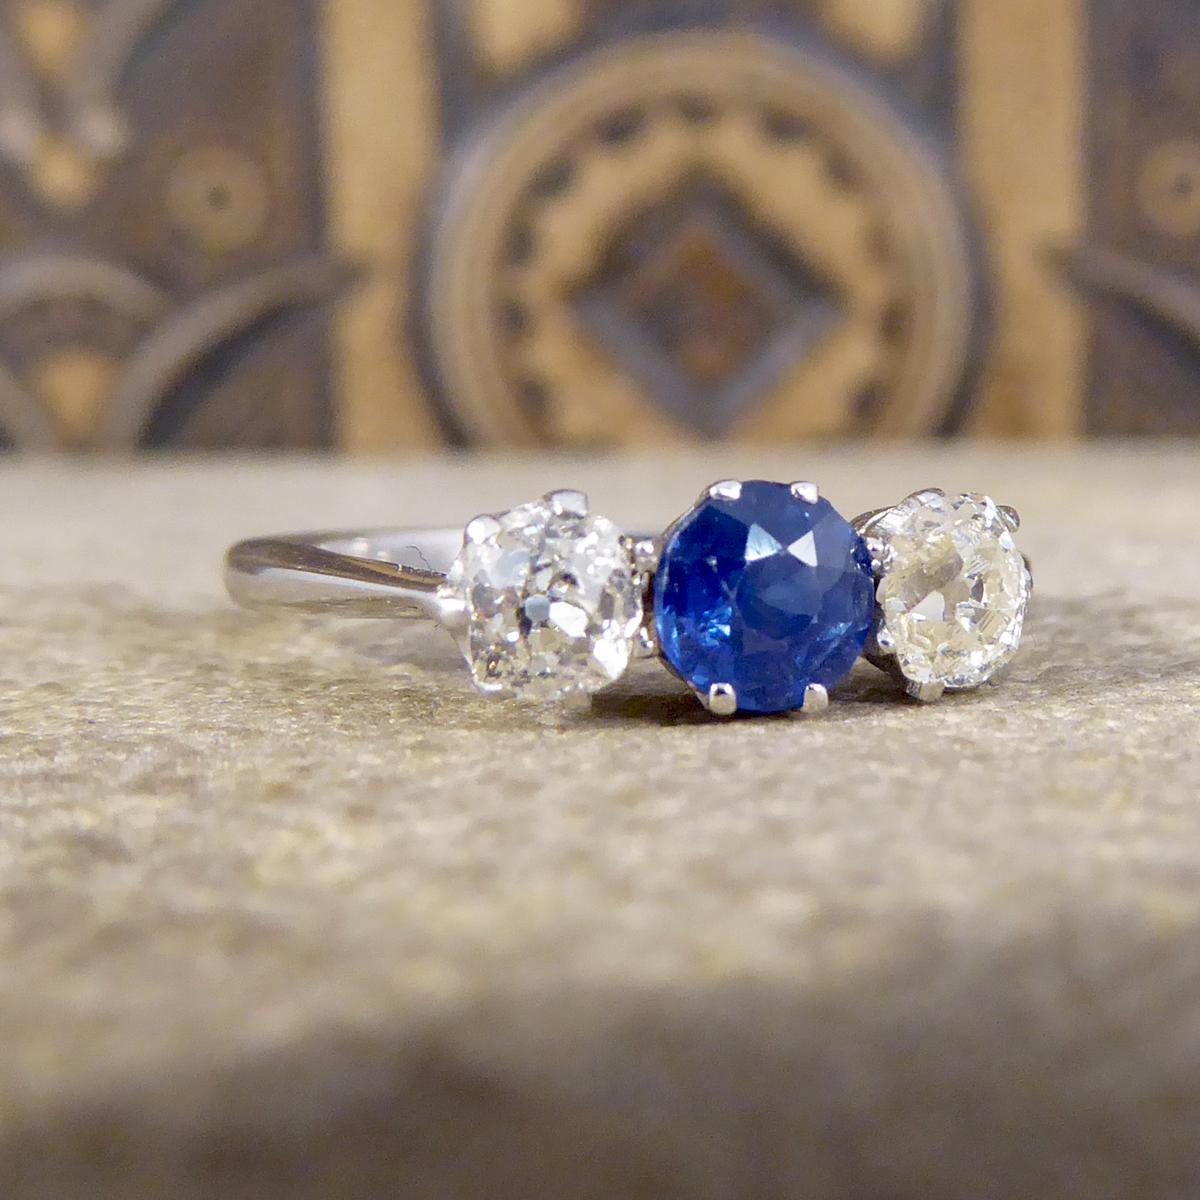 This beautiful three stone ring has been crafted in the Edwardian era and set in a Platinum eight claw setting. It features a beautifully cut Sapphire centre weighing approximately 0.40ct with two Old Cut Diamonds either side weighing a total of